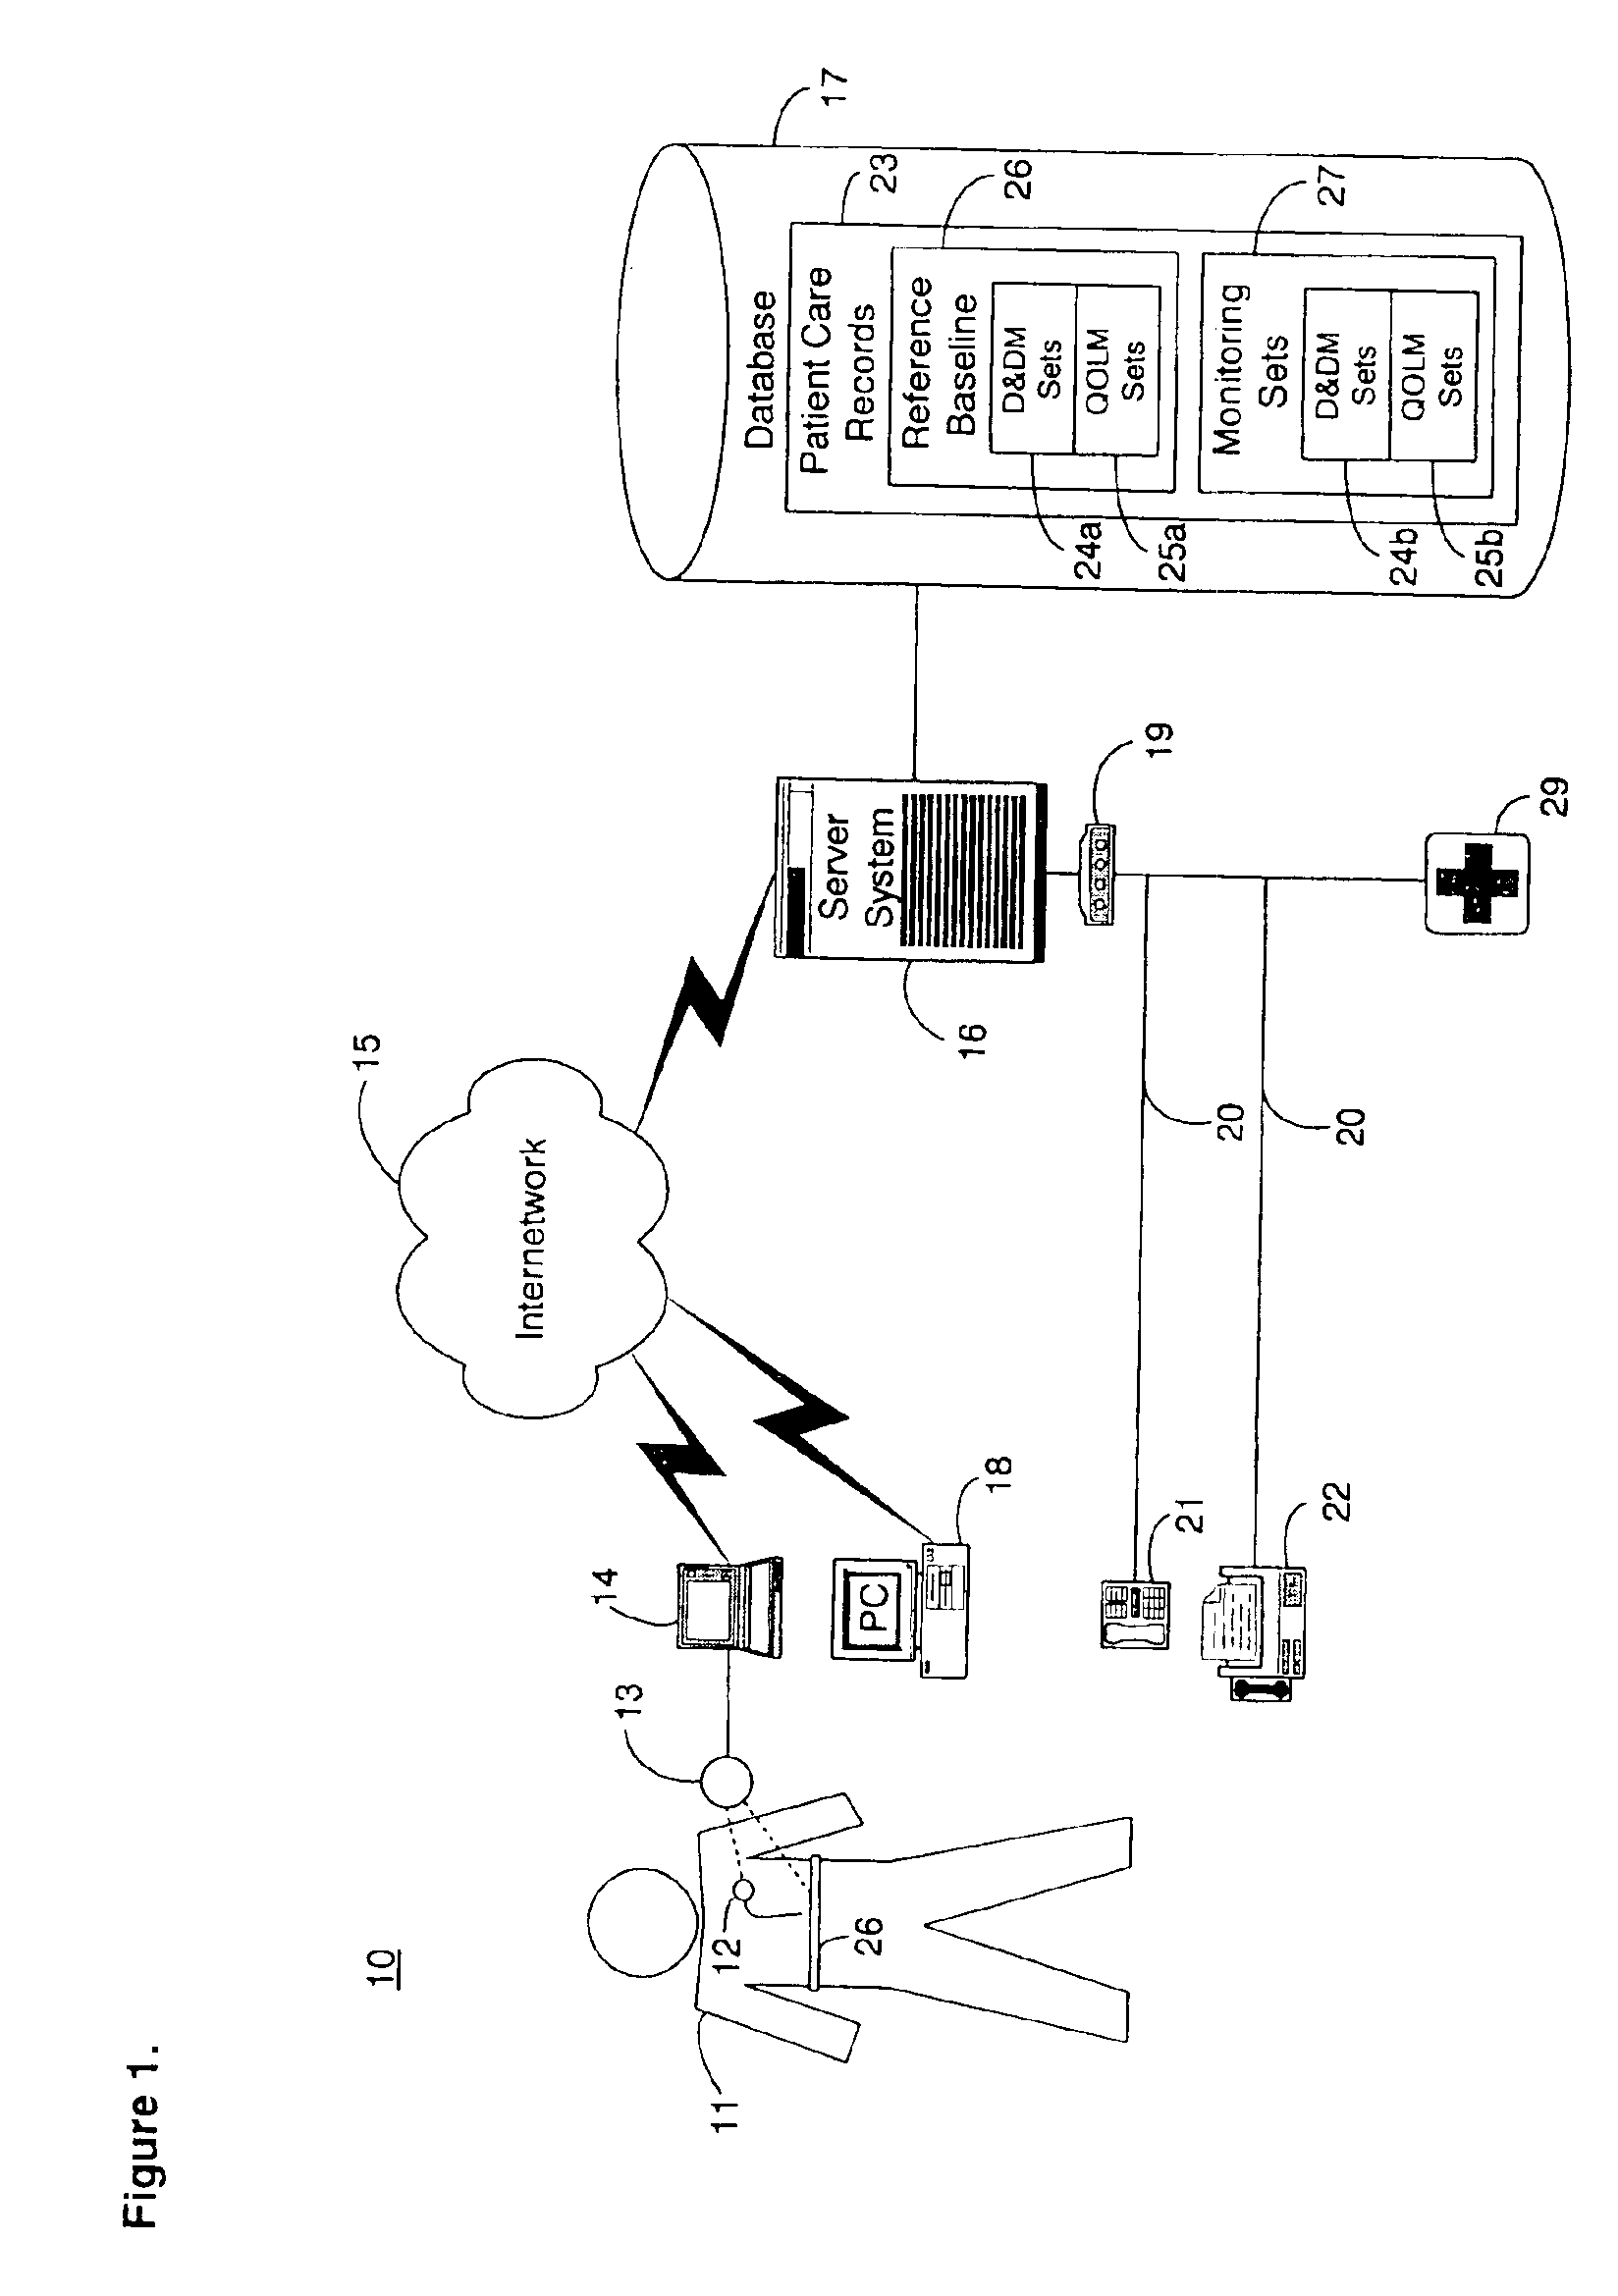 System and method for diagnosing and monitoring myocardial ischemia for automated remote patient care